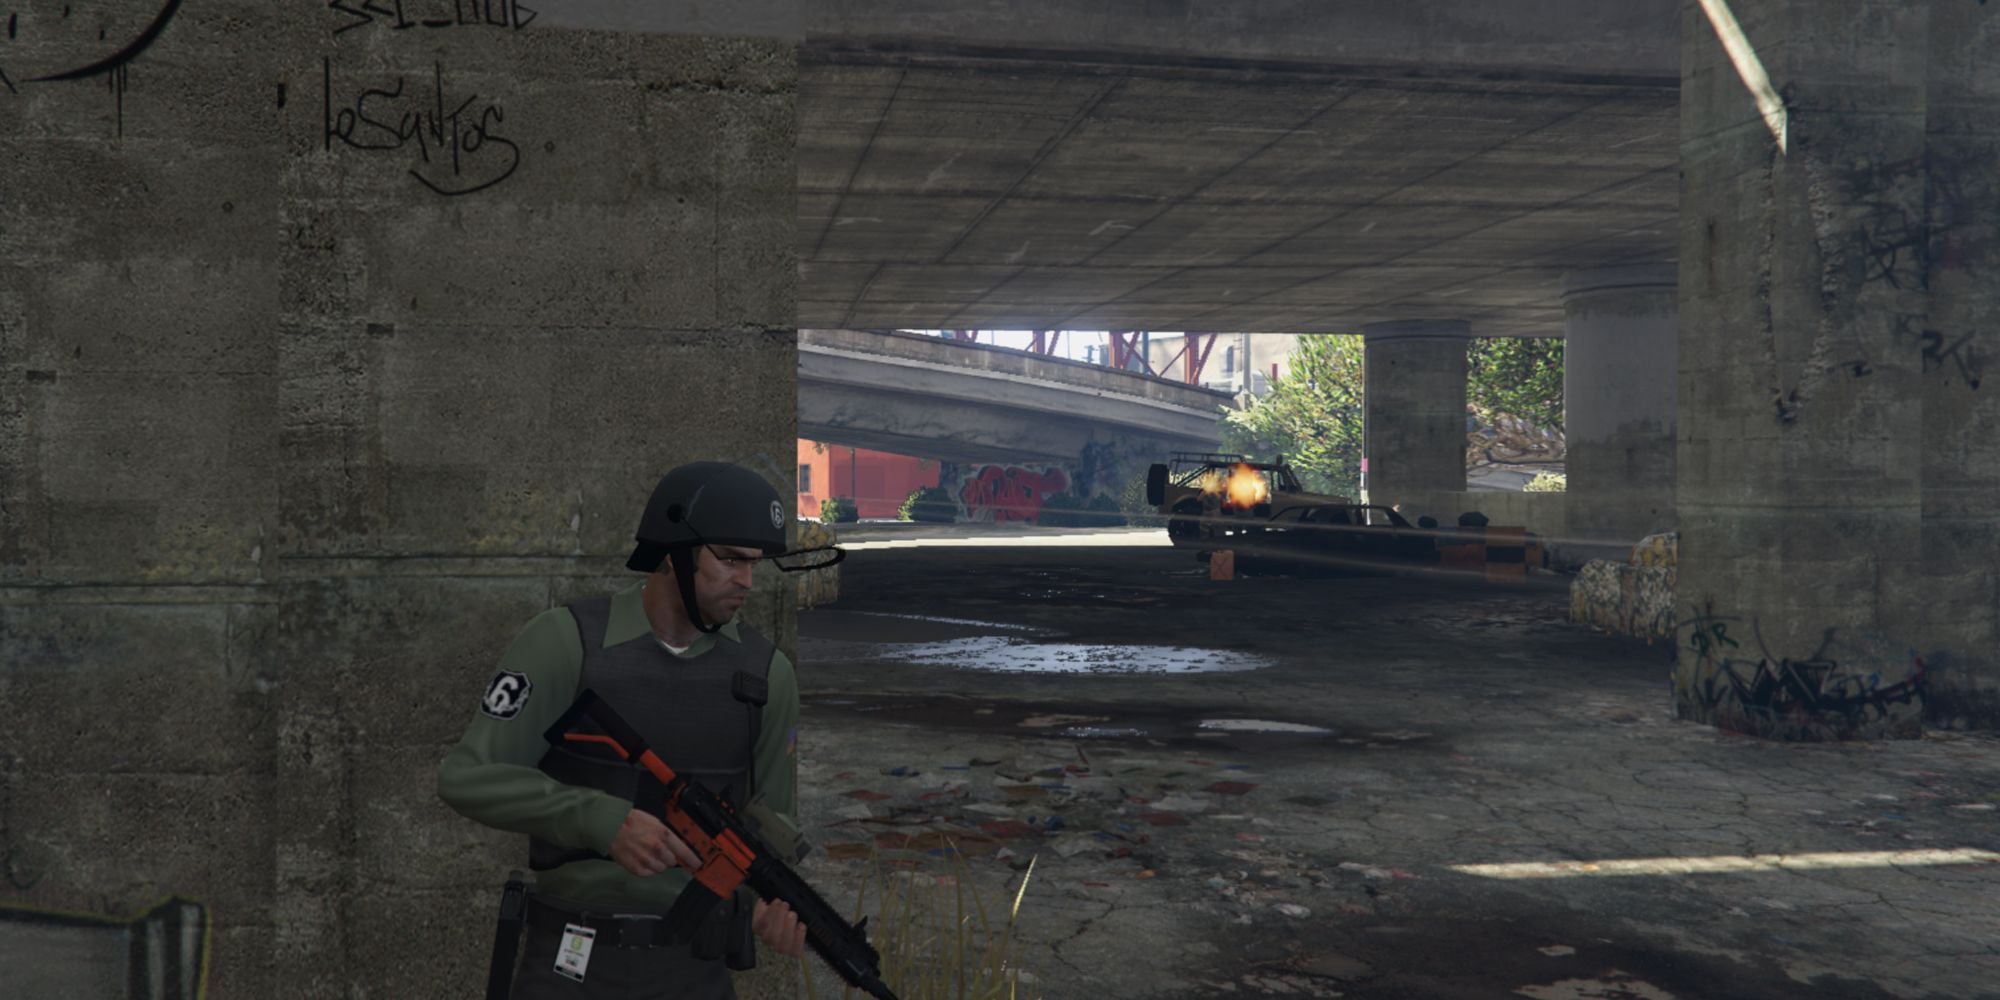 Fending Off Merryweather During The Union Heist in GTA V